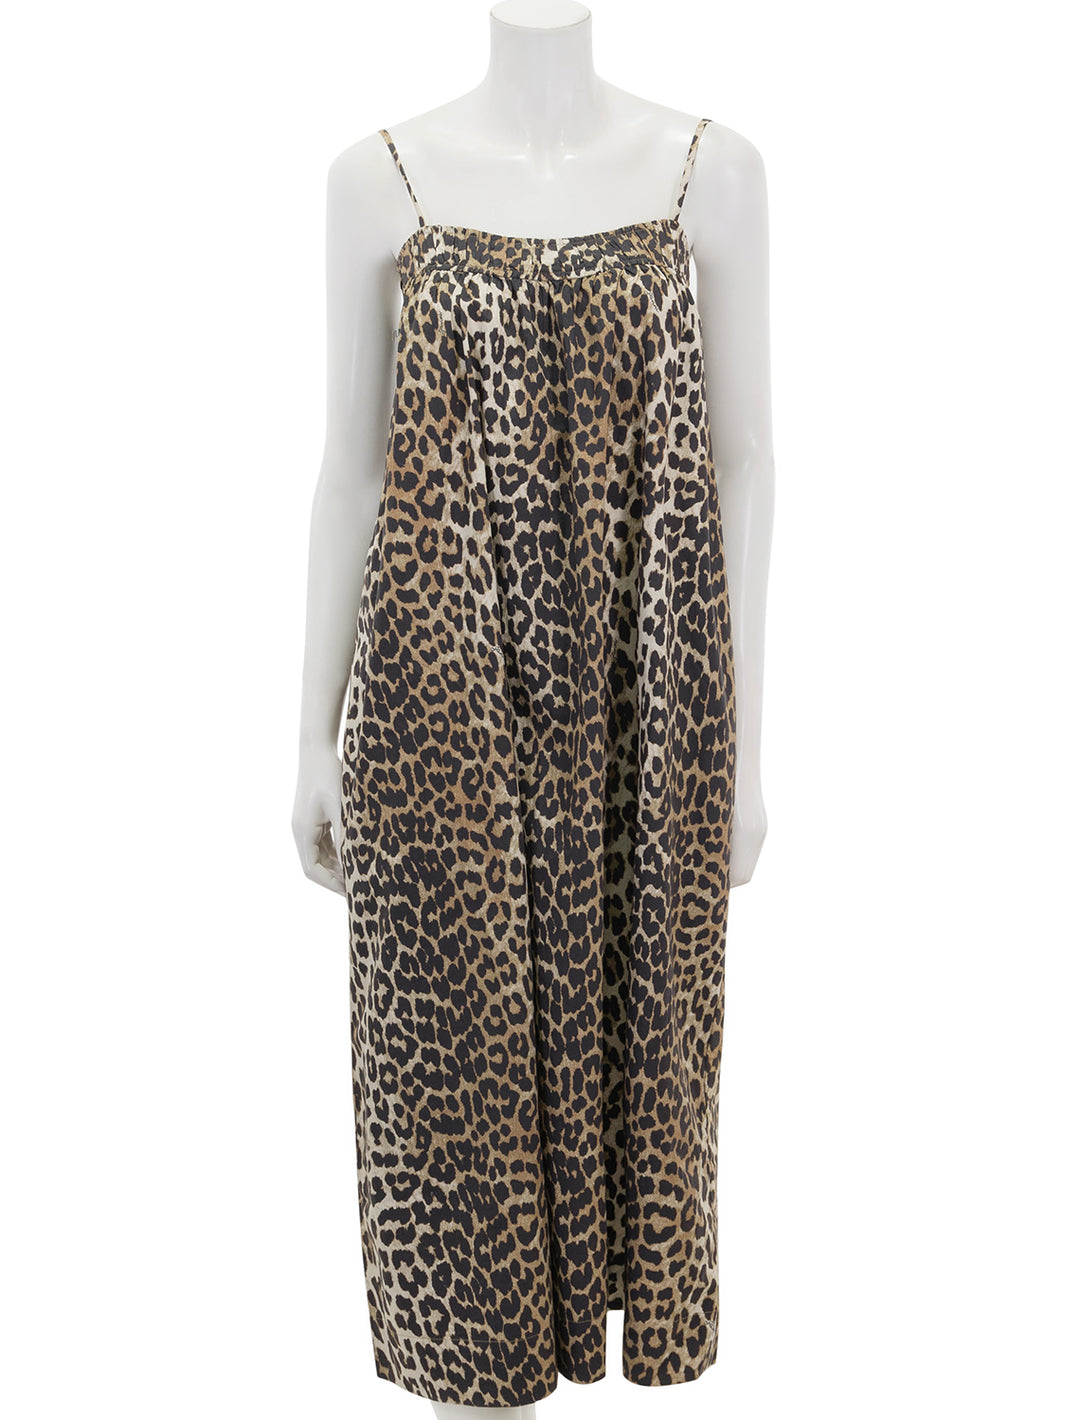 Front view of GANNI's printed cotton midi dress in leopard.